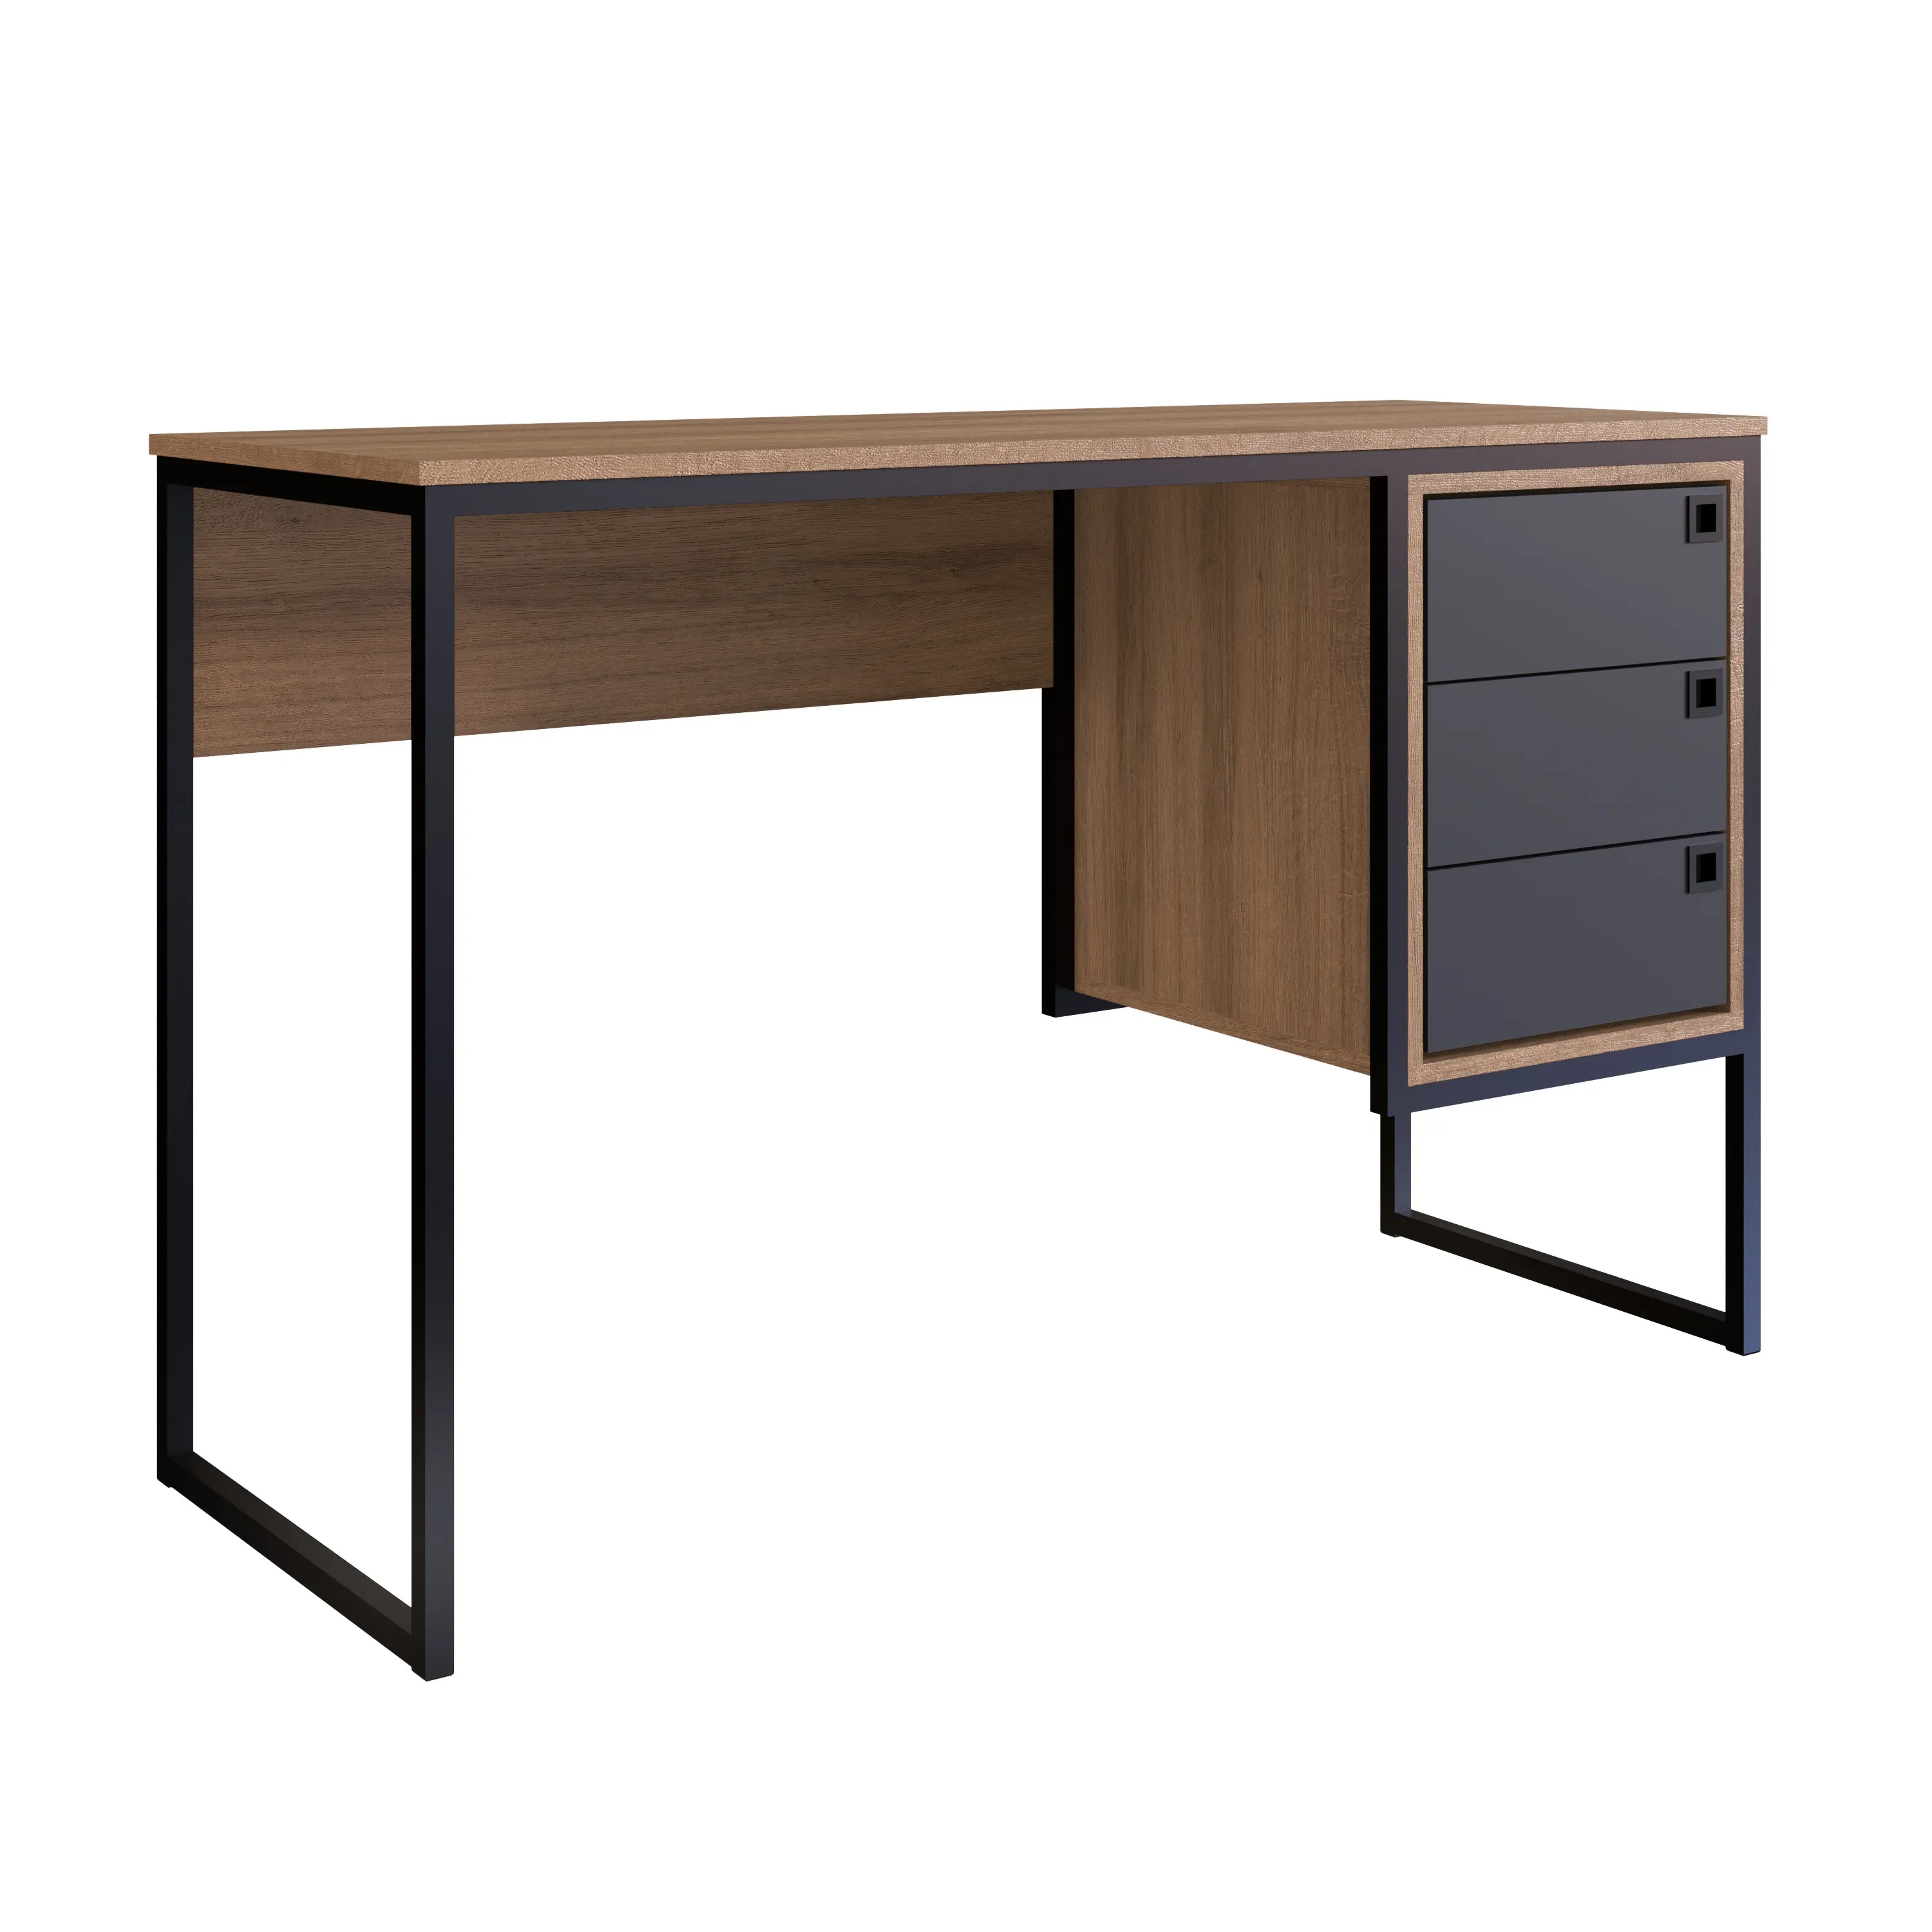 Modern Style Office Desk OFFICE 3 drawers Wooden Commercial Furniture Metal Particleboard Wood/Black Color Brazil Top Design